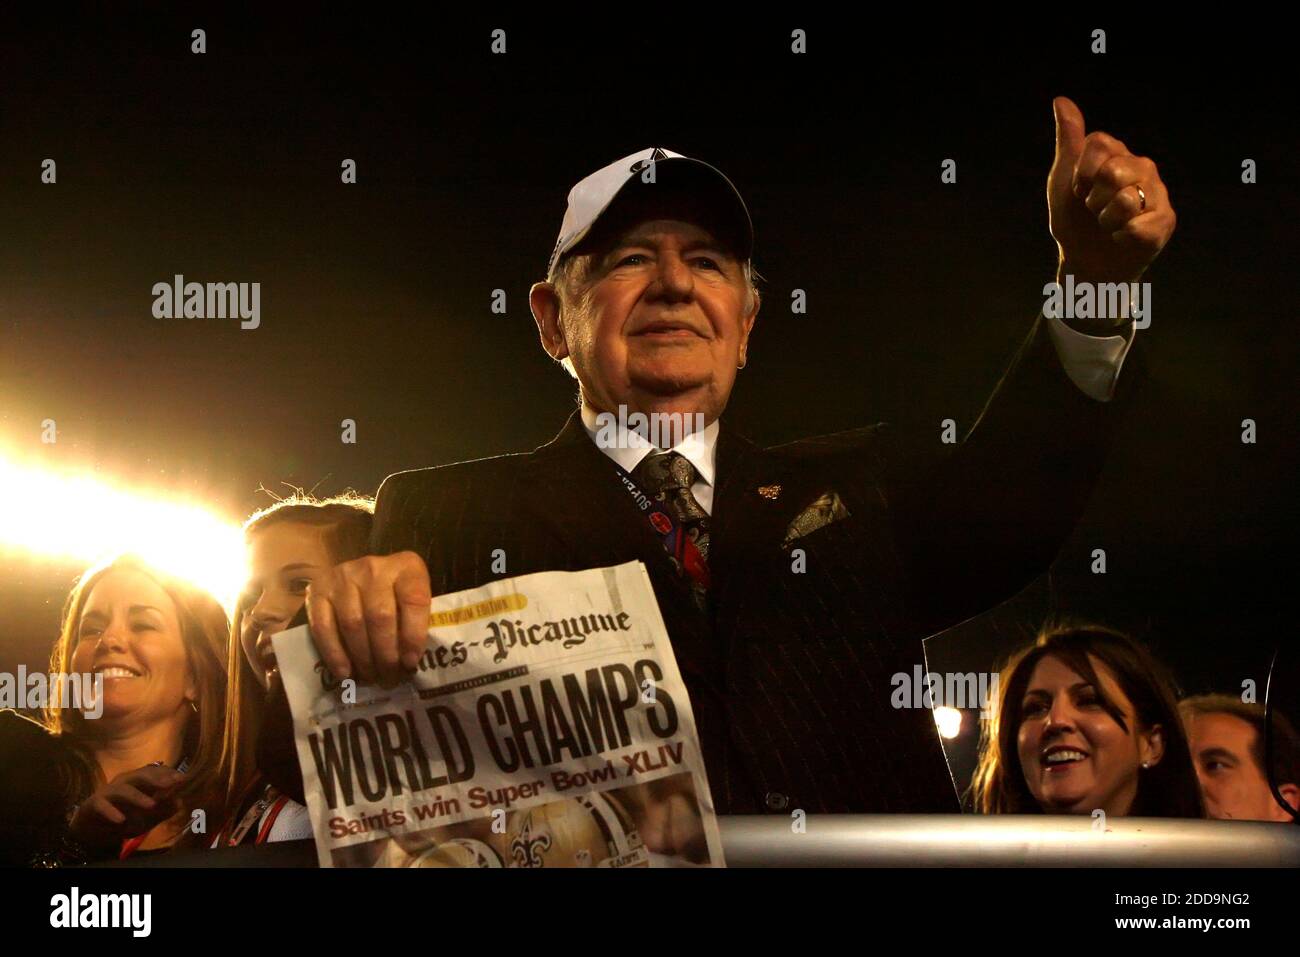 NO FILM, NO VIDEO, NO TV, NO DOCUMENTARY - Saints owner Tom Benson celebrates the win in Super Bowl XLIV at Sun Life Stadium in Miami Gardens, FL, USA on February 7, 2010. The New Orleans Saints beat the Indianapolis Colts 31-17 Photo by Gary Green/Orlando Sentinel/MCT/Cameleon/ABACAPRESS.COM Stock Photo